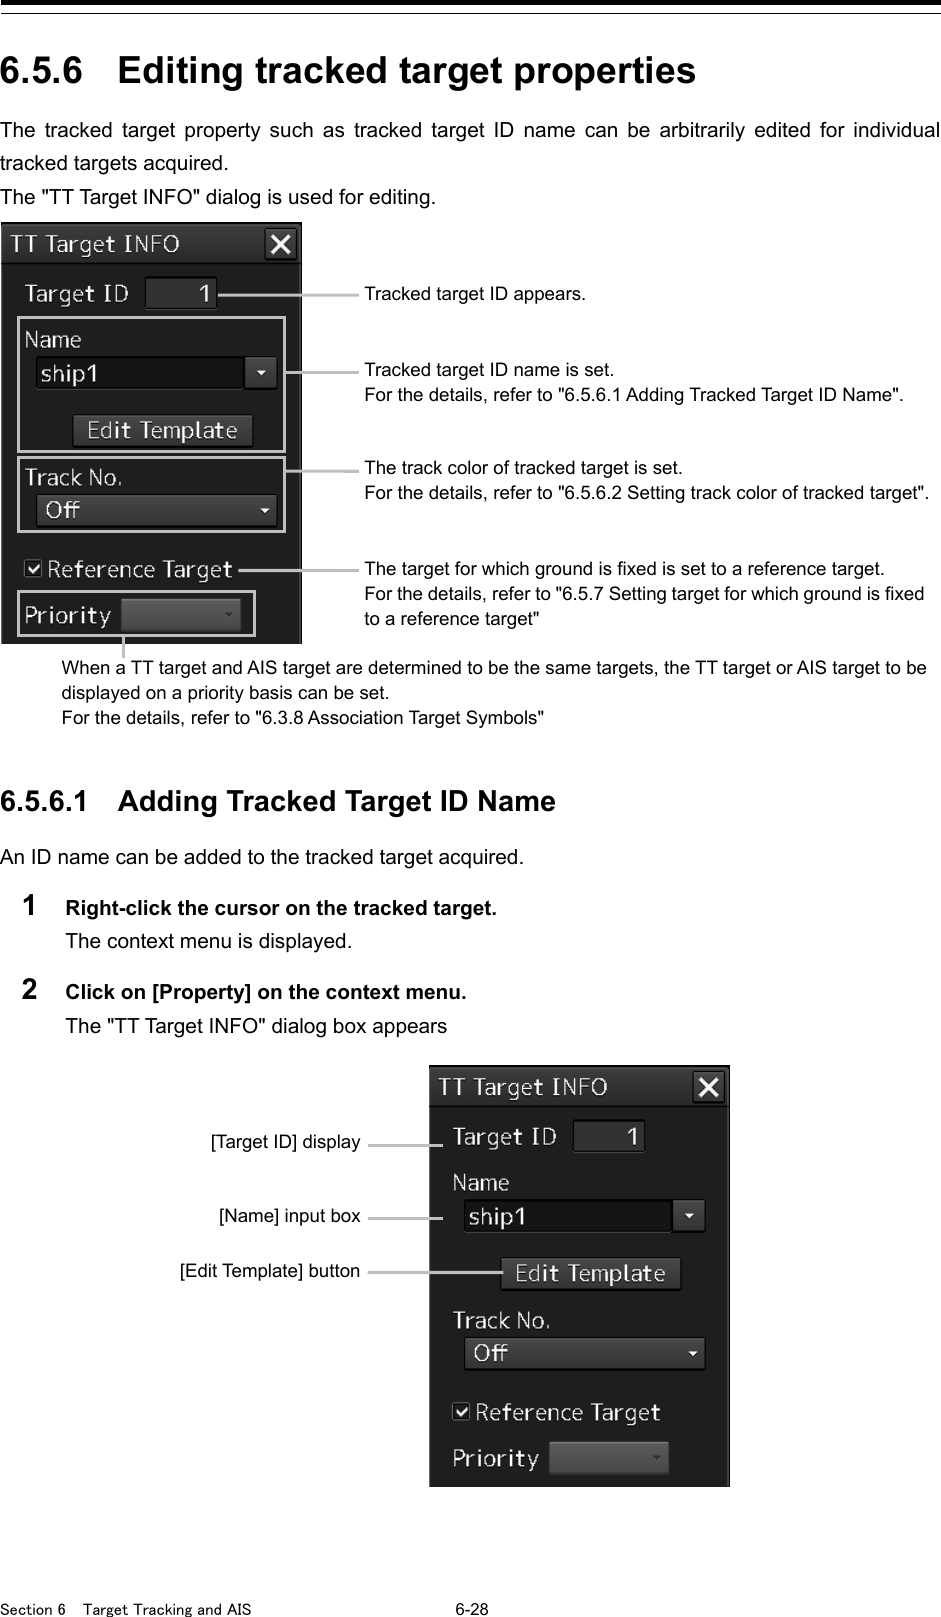  Section 6  Target Tracking and AIS 6-28  6.5.6 Editing tracked target properties The tracked target property such as tracked target ID name can be arbitrarily edited for individual tracked targets acquired. The &quot;TT Target INFO&quot; dialog is used for editing.   6.5.6.1 Adding Tracked Target ID Name An ID name can be added to the tracked target acquired. 1  Right-click the cursor on the tracked target. The context menu is displayed. 2  Click on [Property] on the context menu. The &quot;TT Target INFO&quot; dialog box appears     [Target ID] display [Name] input box [Edit Template] button  Tracked target ID appears. Tracked target ID name is set. For the details, refer to &quot;6.5.6.1 Adding Tracked Target ID Name&quot;.  The track color of tracked target is set. For the details, refer to &quot;6.5.6.2 Setting track color of tracked target&quot;. The target for which ground is fixed is set to a reference target. For the details, refer to &quot;6.5.7 Setting target for which ground is fixed to a reference target&quot;  When a TT target and AIS target are determined to be the same targets, the TT target or AIS target to be displayed on a priority basis can be set. For the details, refer to &quot;6.3.8 Association Target Symbols&quot; 